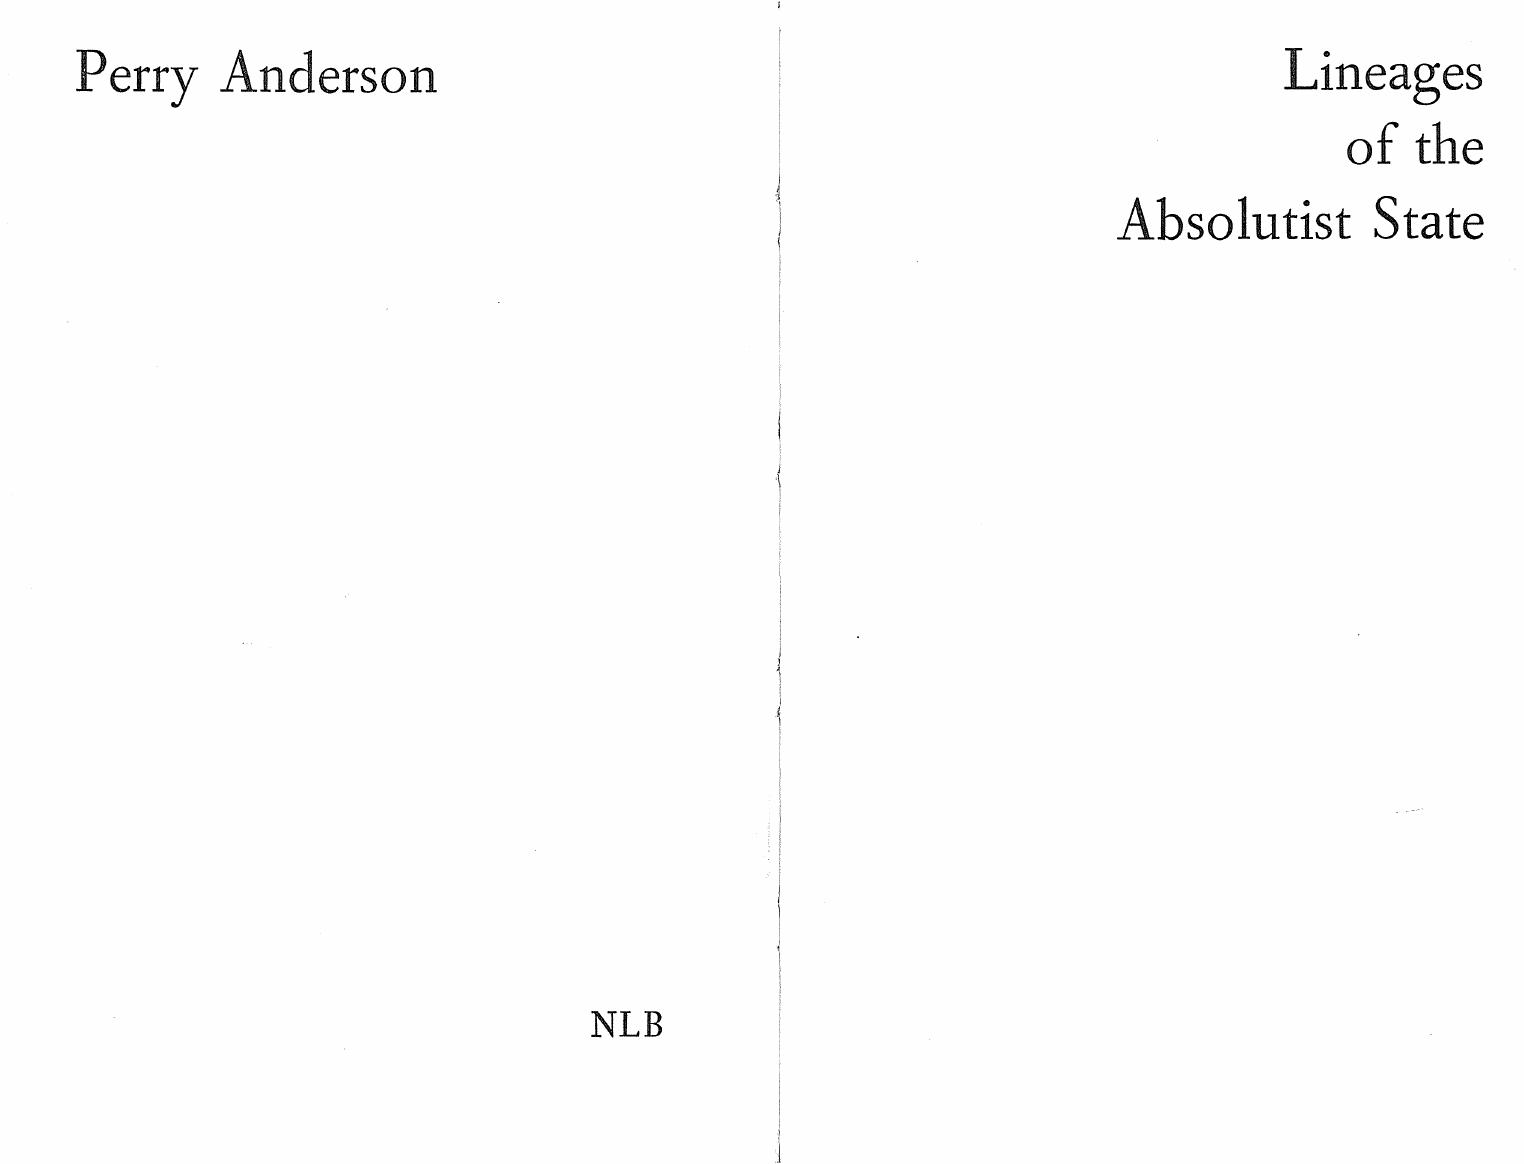 Lineages of the Absolutist State by Perry Anderson